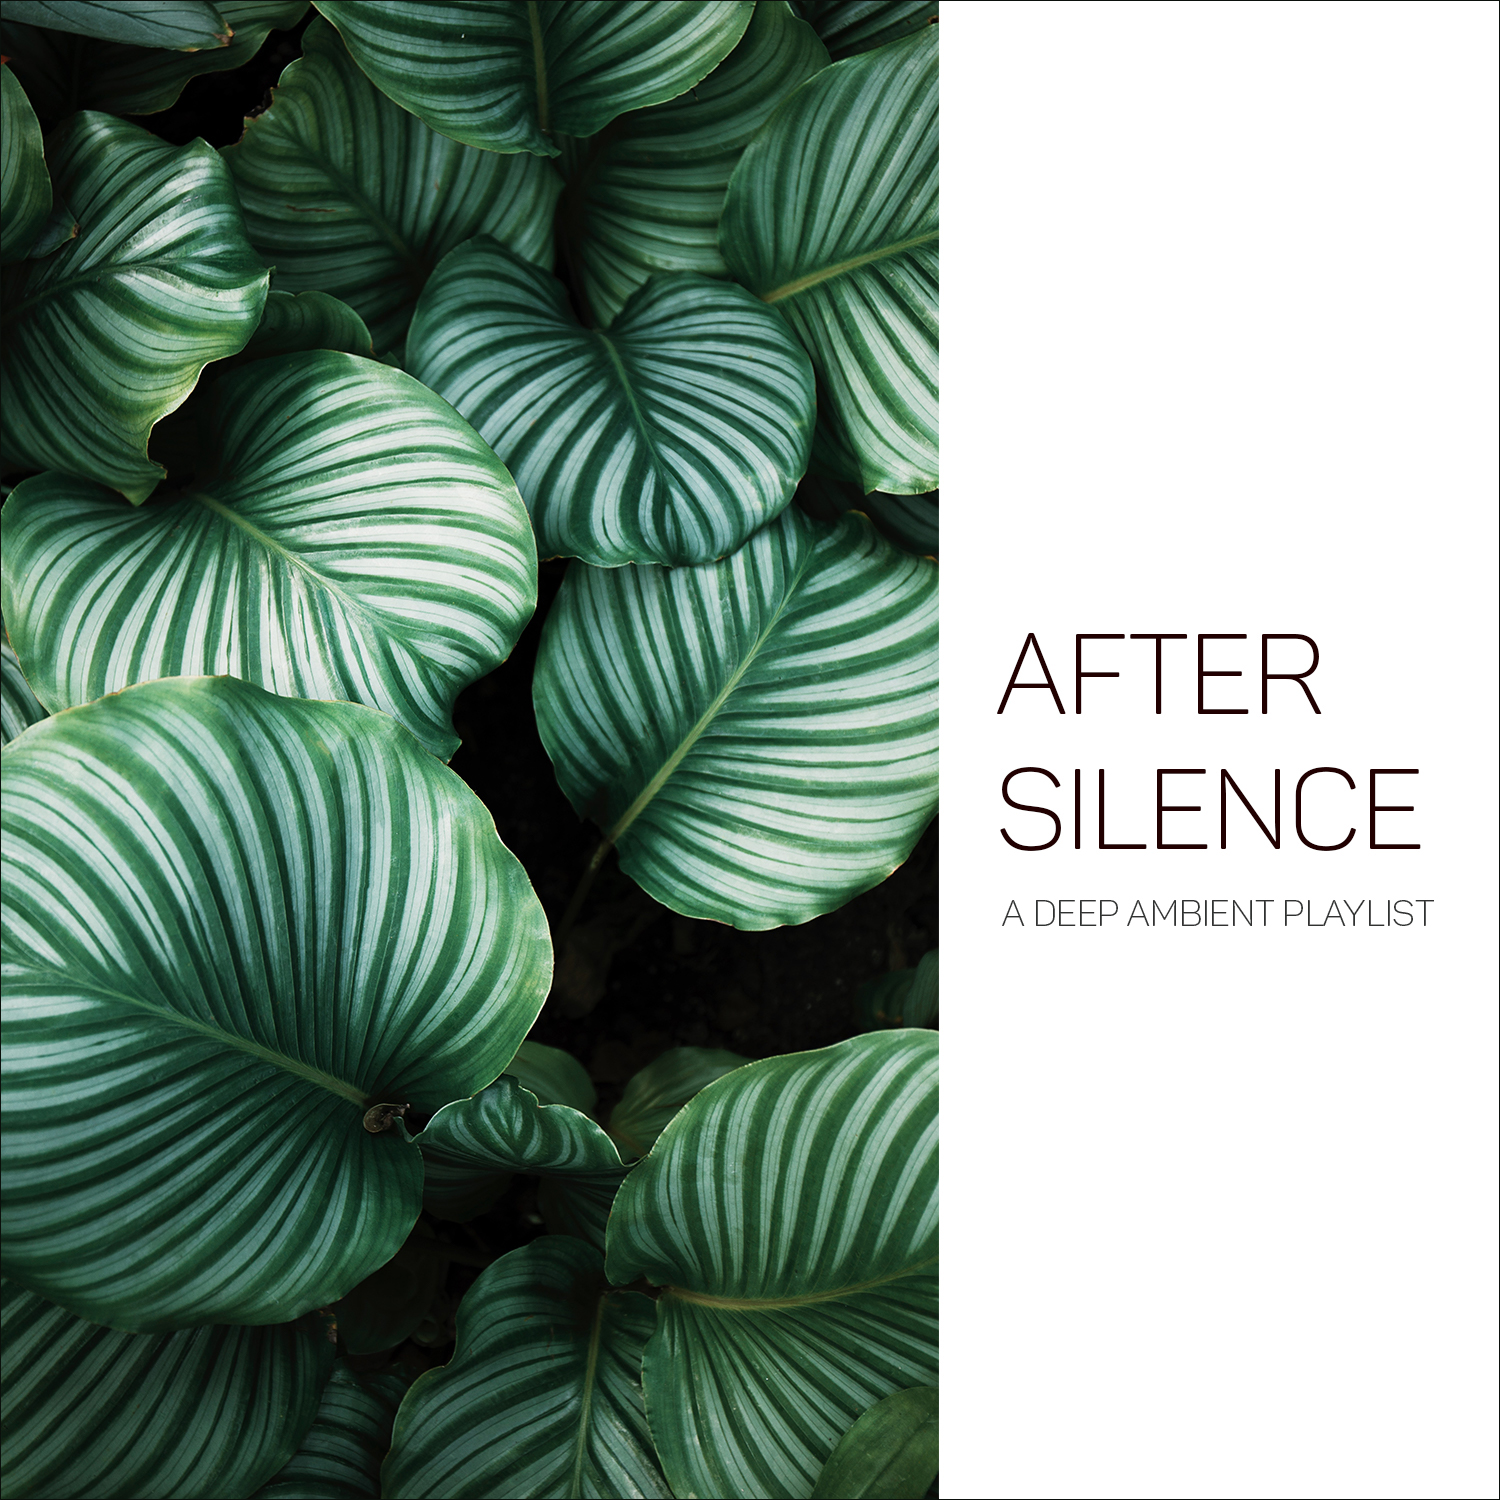 After Silence (A Deep Ambient Playlist)